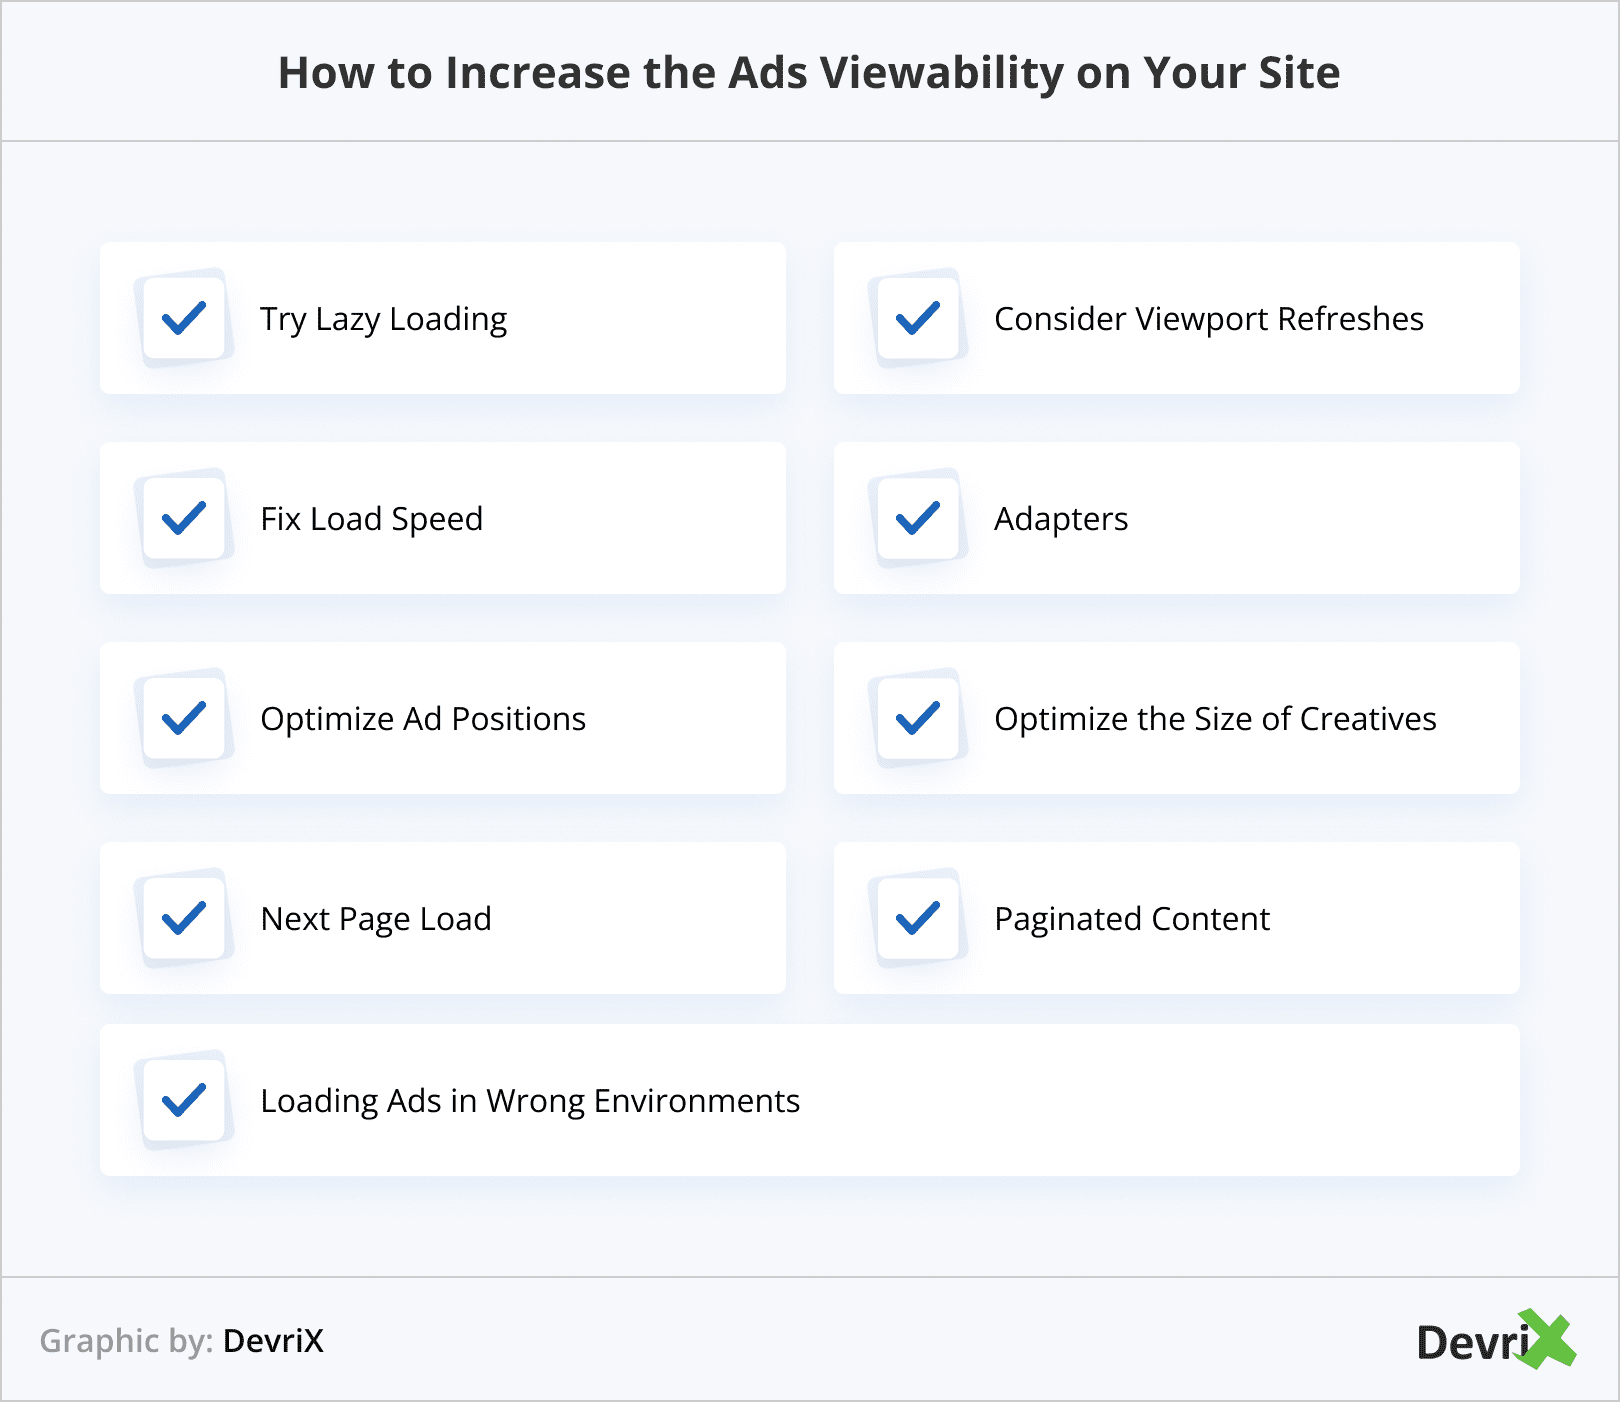 How to Increase the Ads Viewability on Your Site